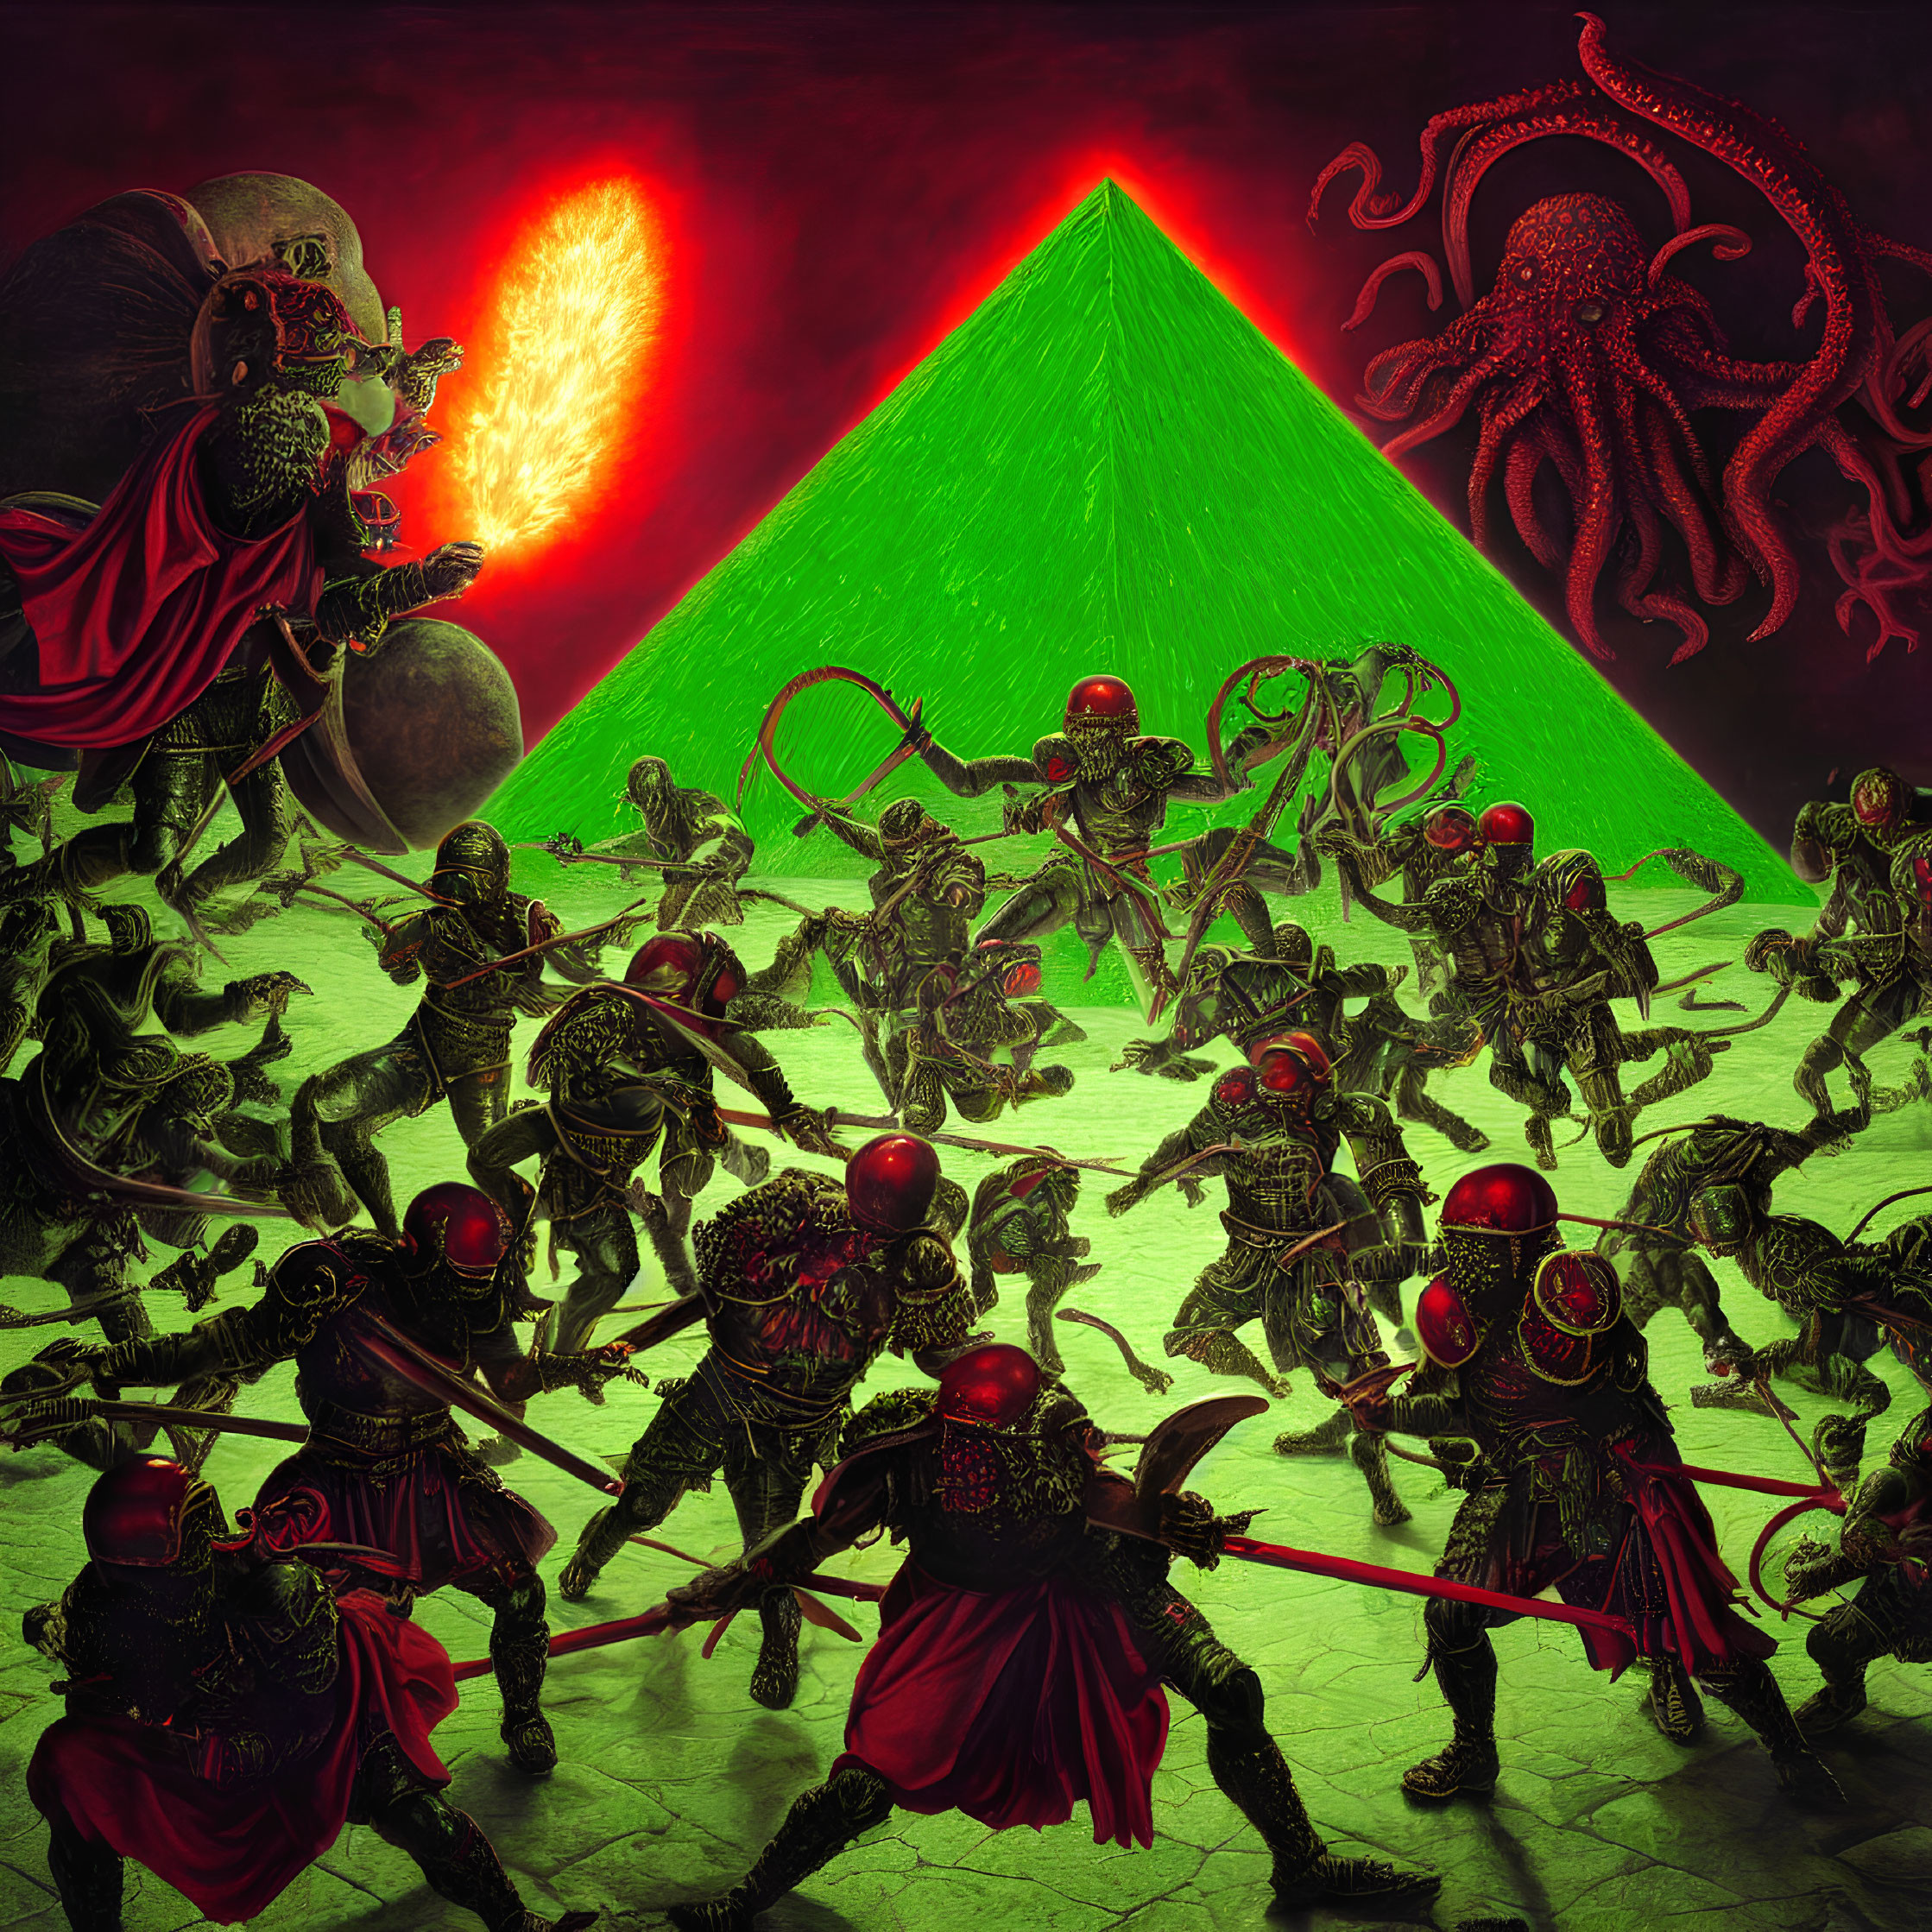 Skeletal warriors in red capes march under green pyramid with giant tentacled creature